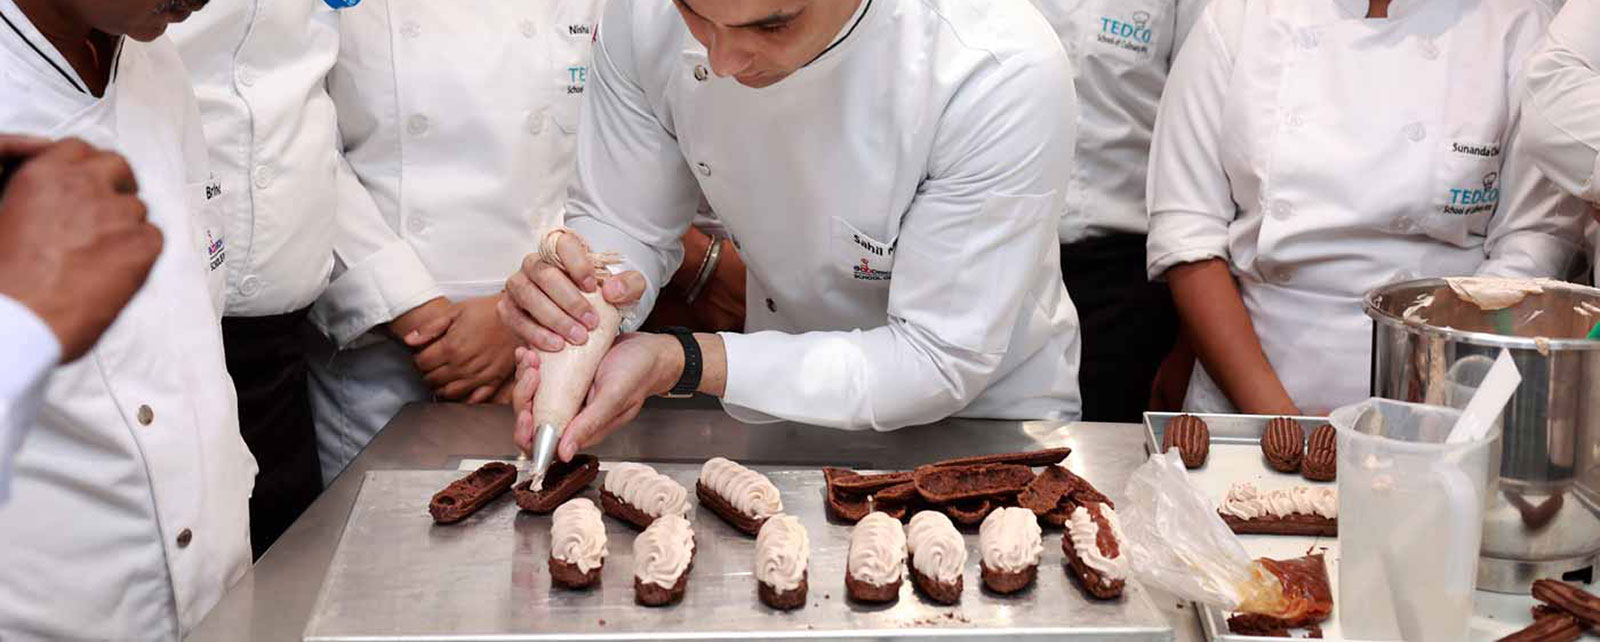 How to Start a Career in Bakery and Confectionery?